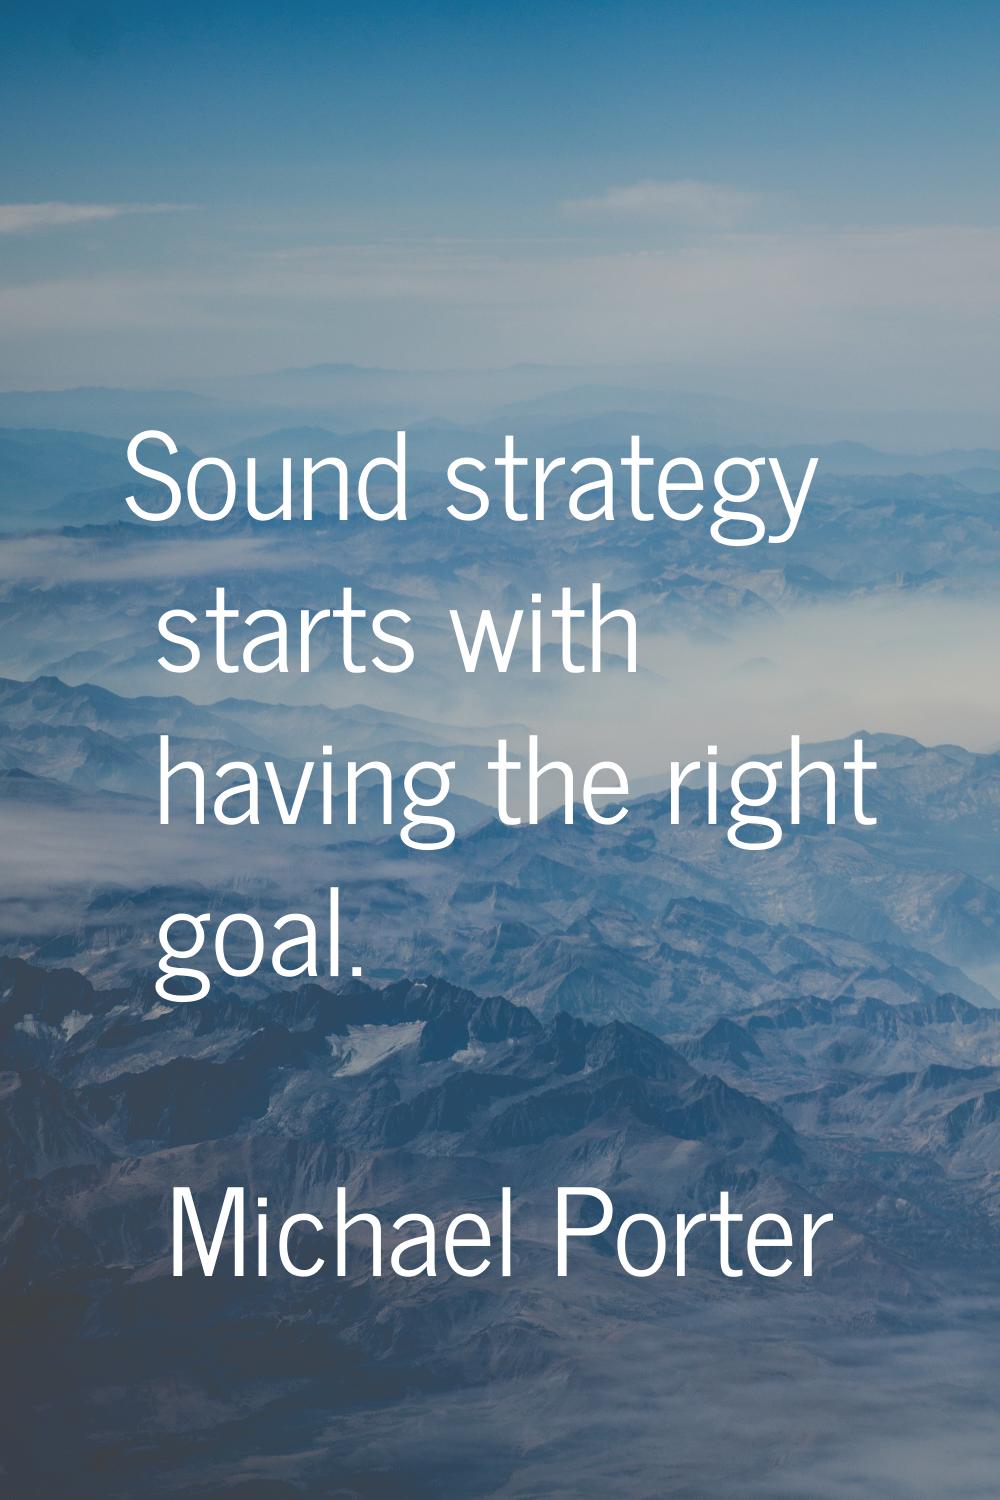 Sound strategy starts with having the right goal.